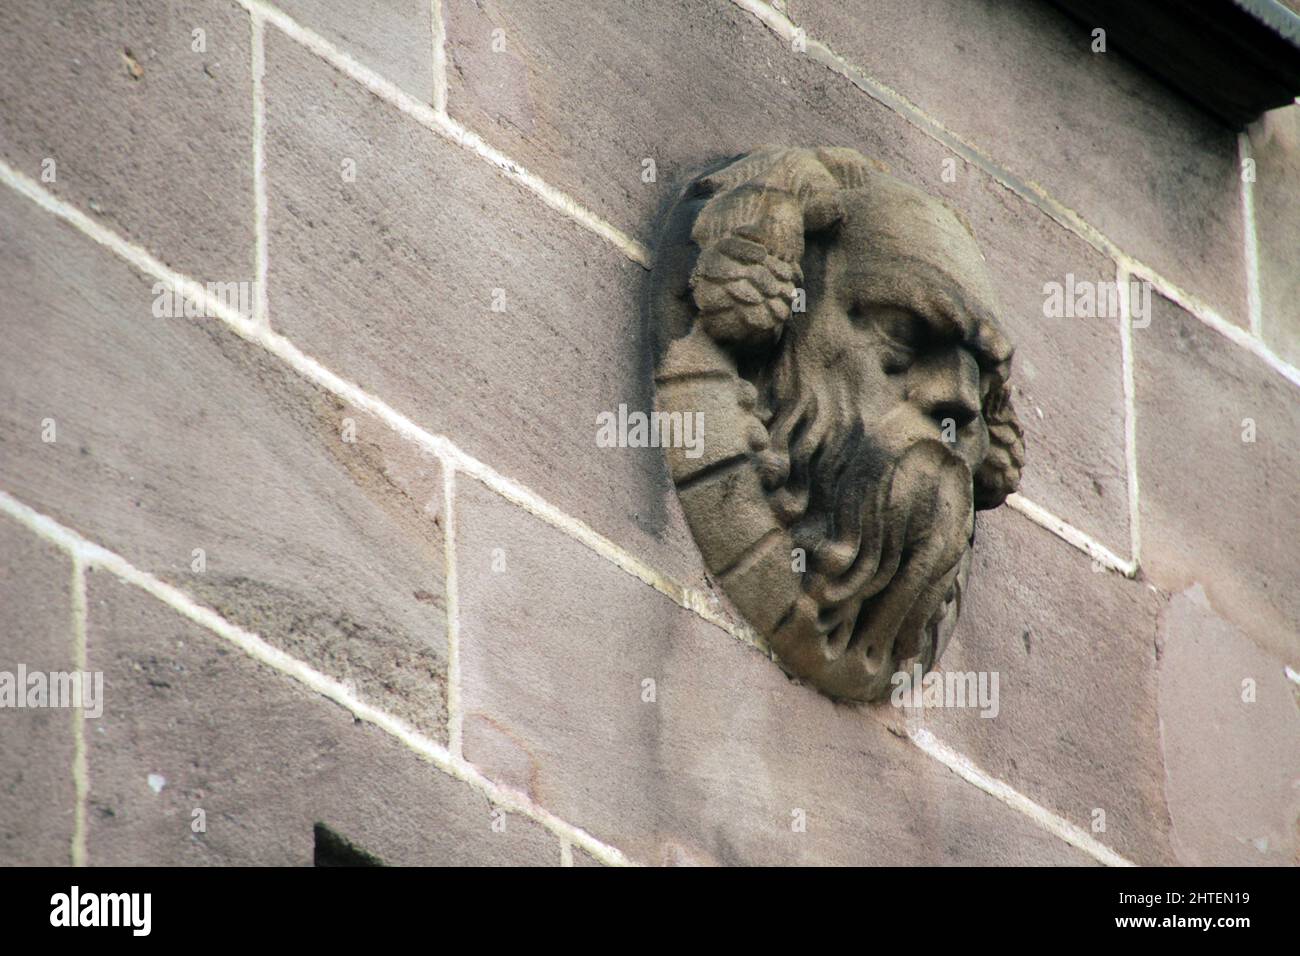 A closeup shot of a mascaron ornament carved on a building in Nuremberg, Germany Stock Photo